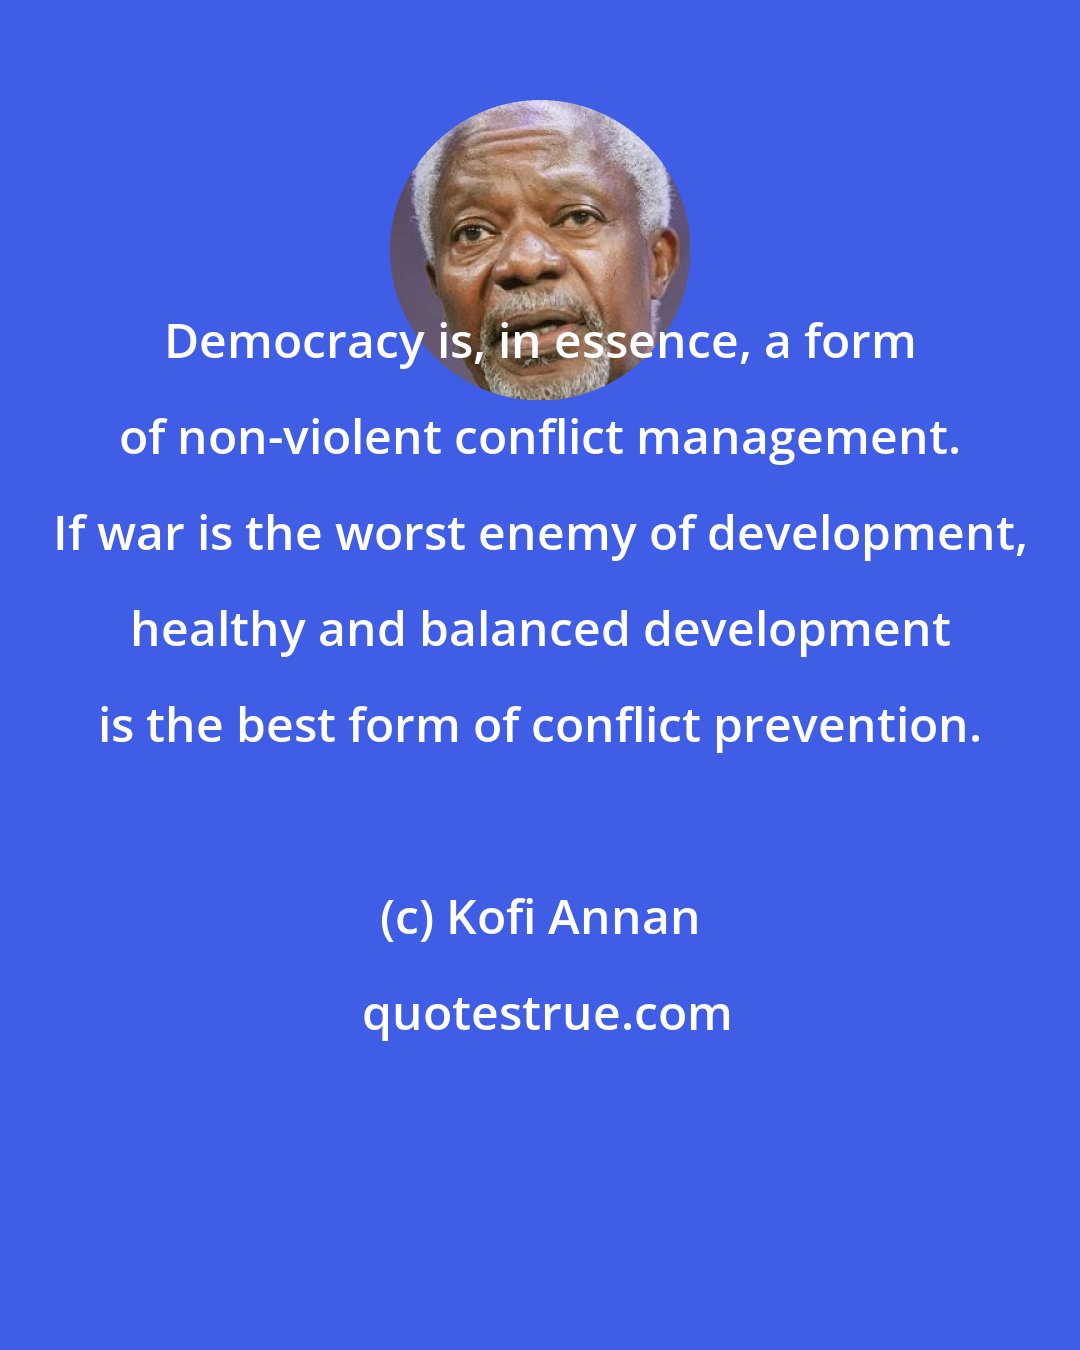 Kofi Annan: Democracy is, in essence, a form of non-violent conflict management. If war is the worst enemy of development, healthy and balanced development is the best form of conflict prevention.